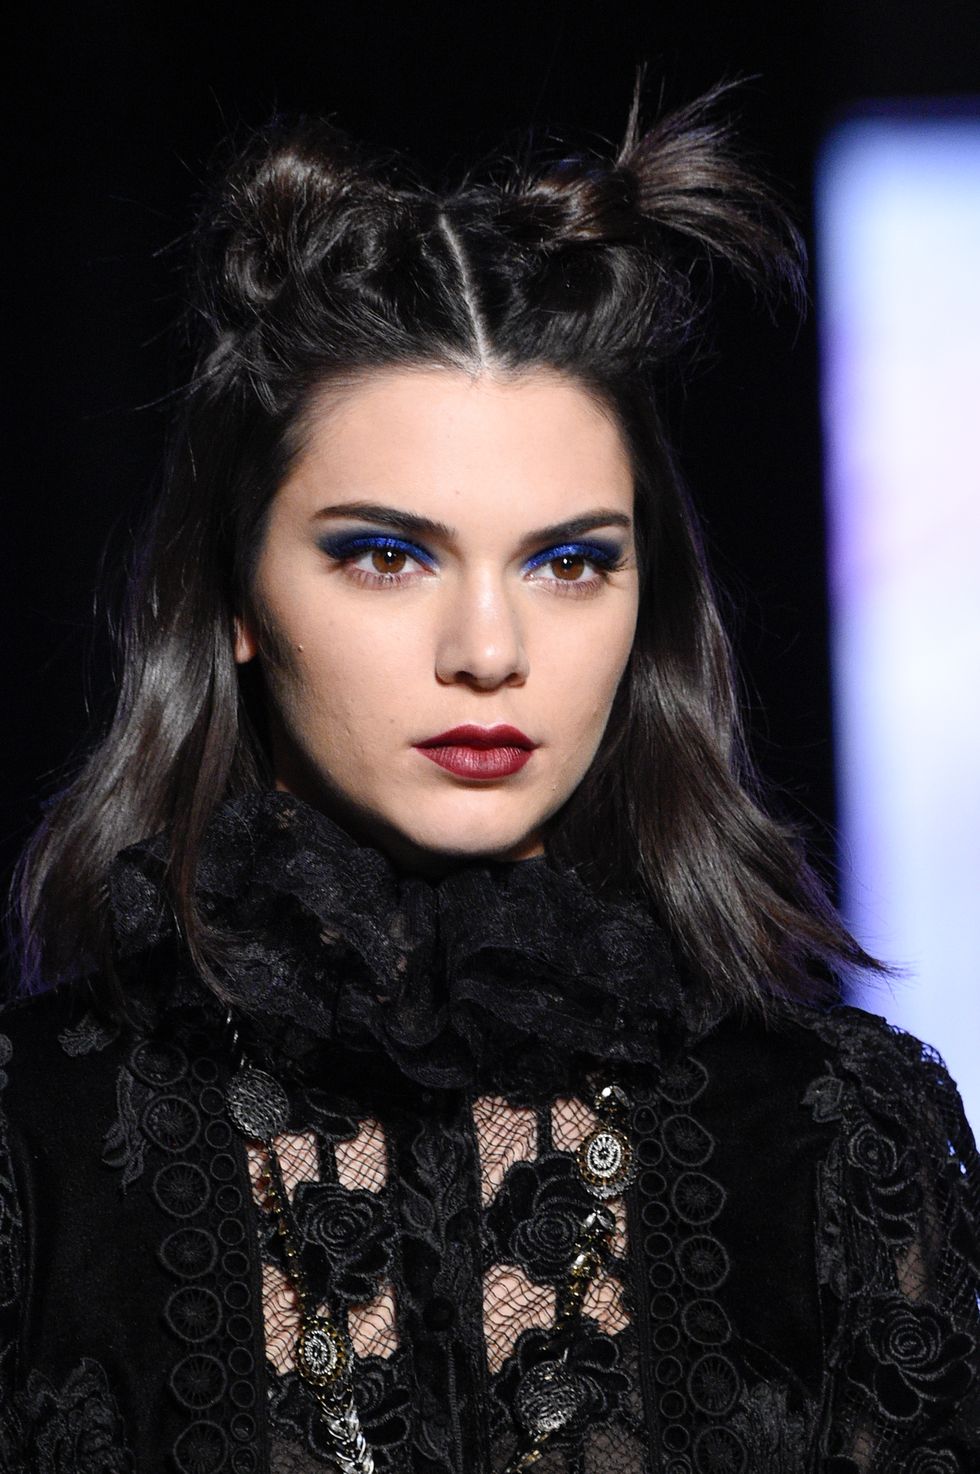 NEW YORK, NY - FEBRUARY 15:  Kendall Jenner, beauty detail, walks the runway for the Anna Sui collection during New York Fashion Week: The Shows at Gallery 1, Skylight Clarkson Sq on February 15, 2017 in New York City.  (Photo by Peter White/WireImage)